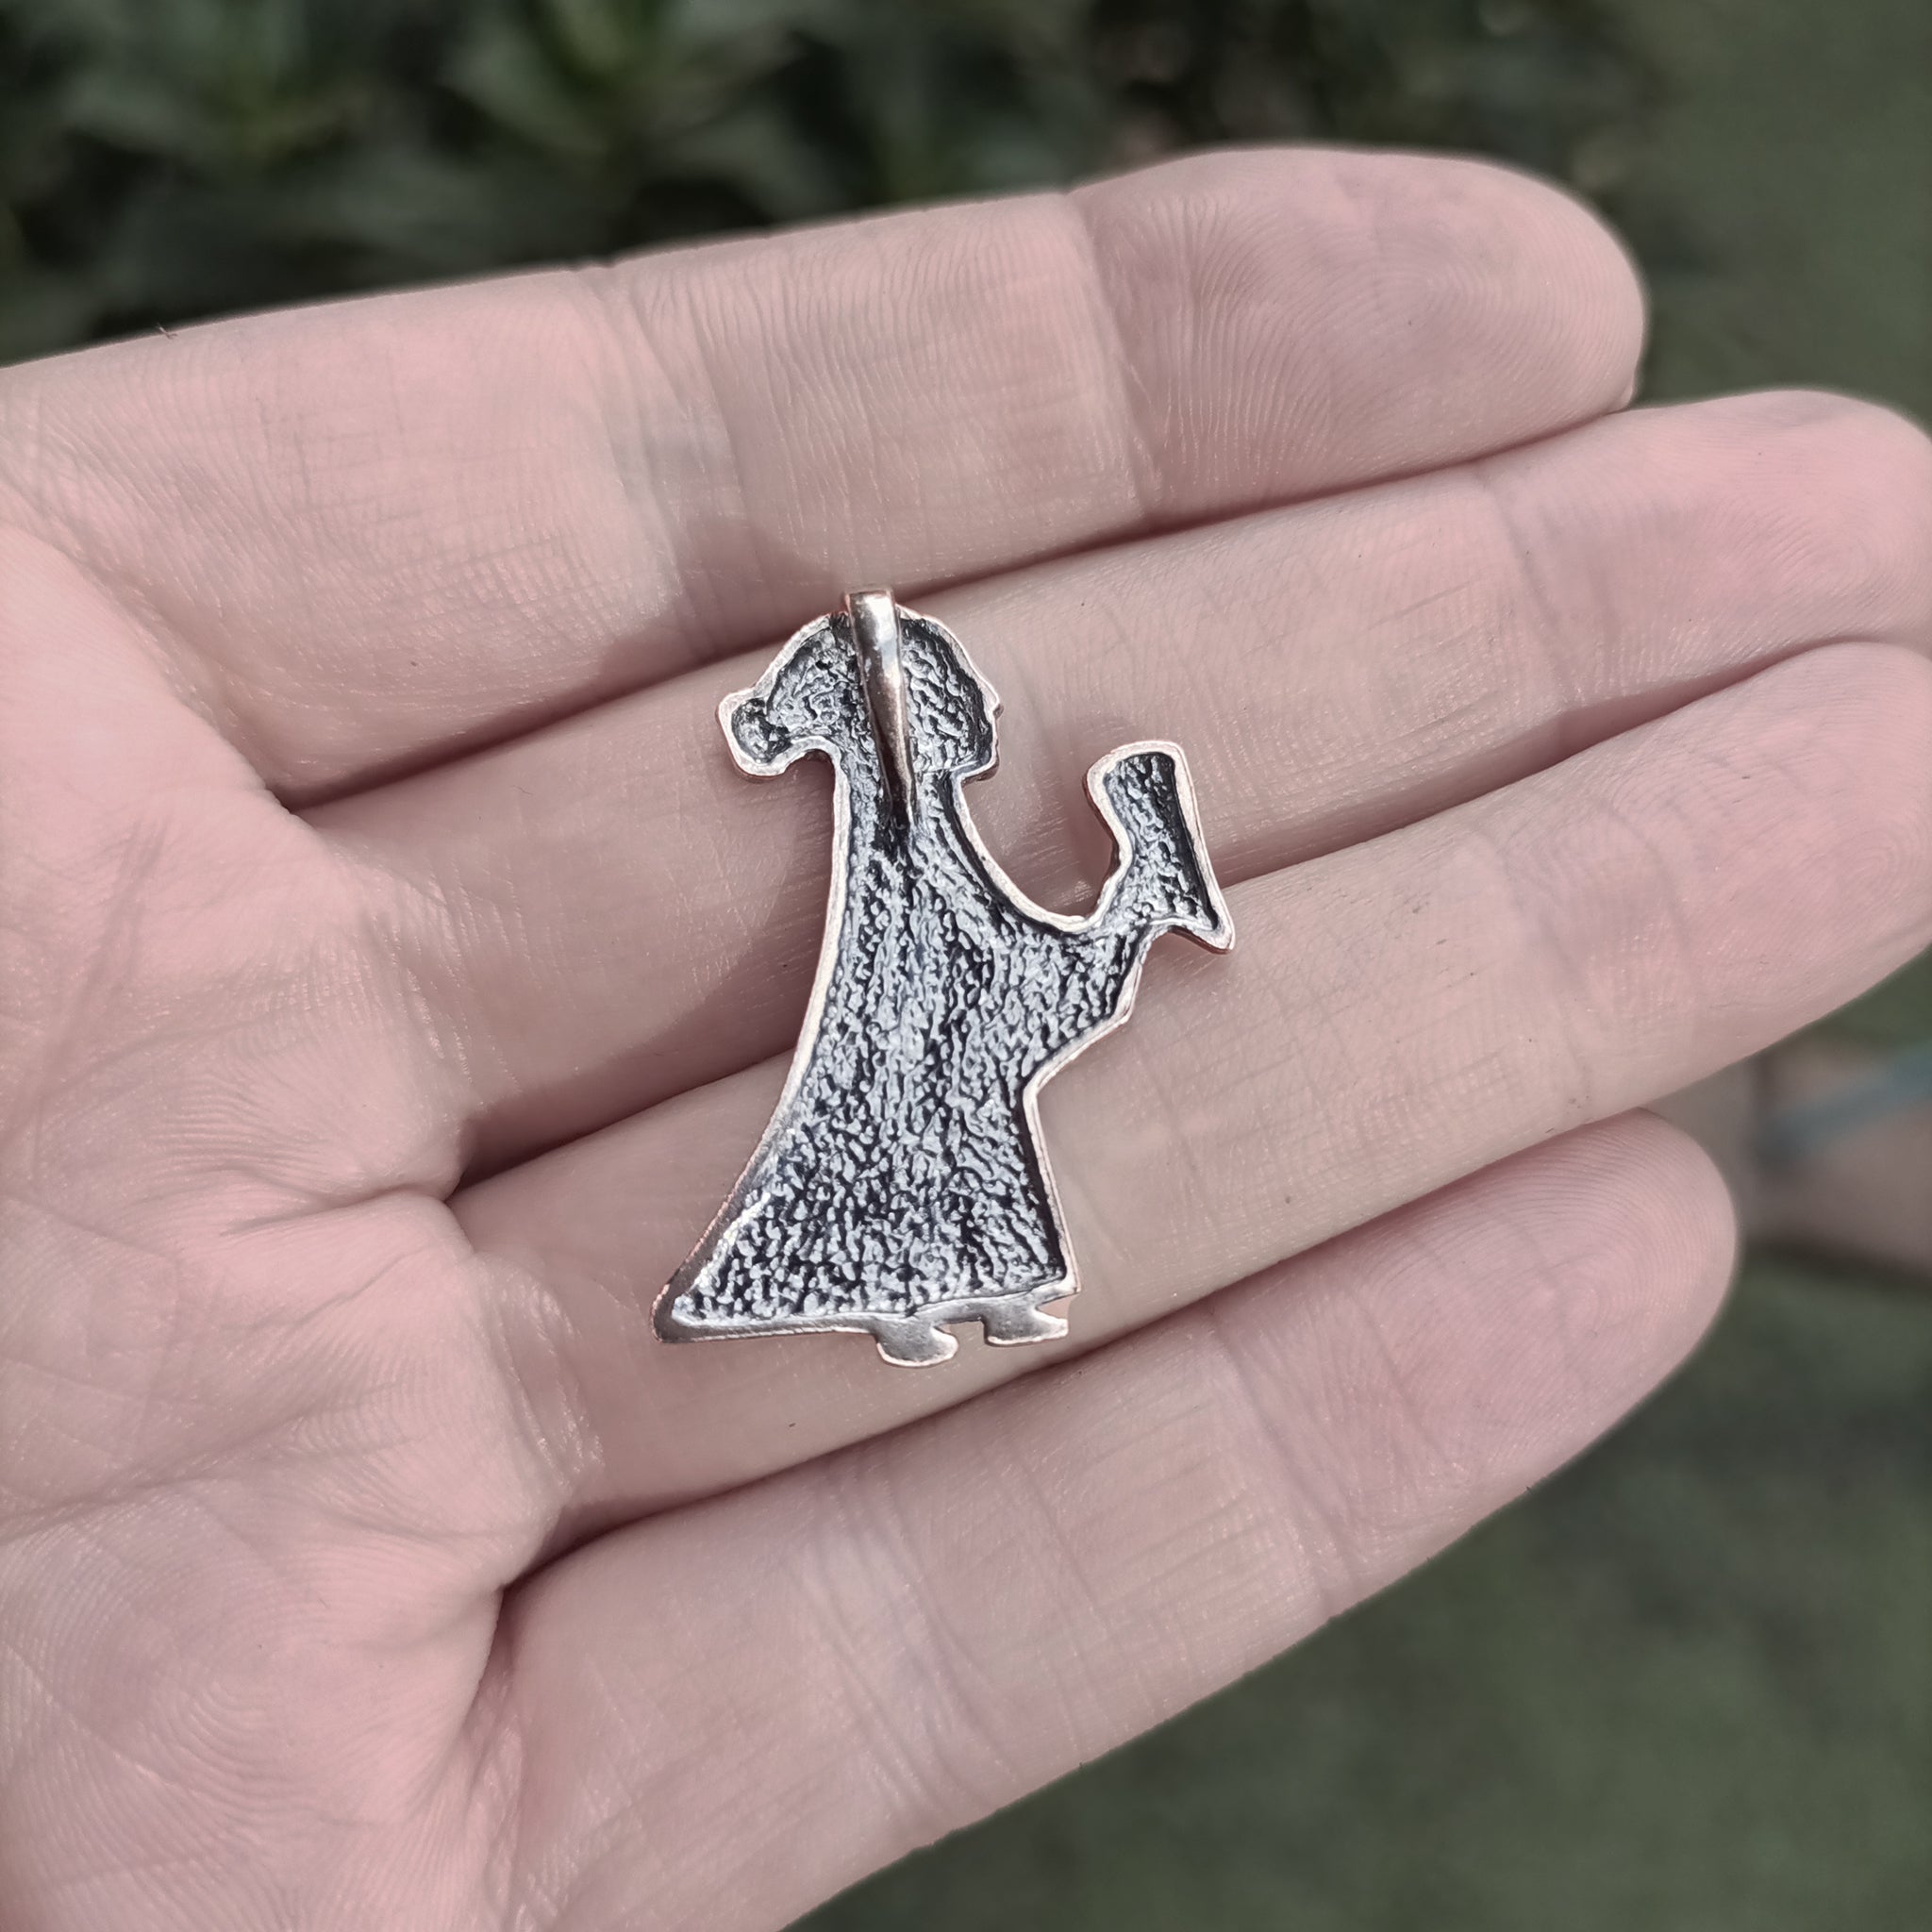 Silver Valkyrie Pendant on Hand - Back View